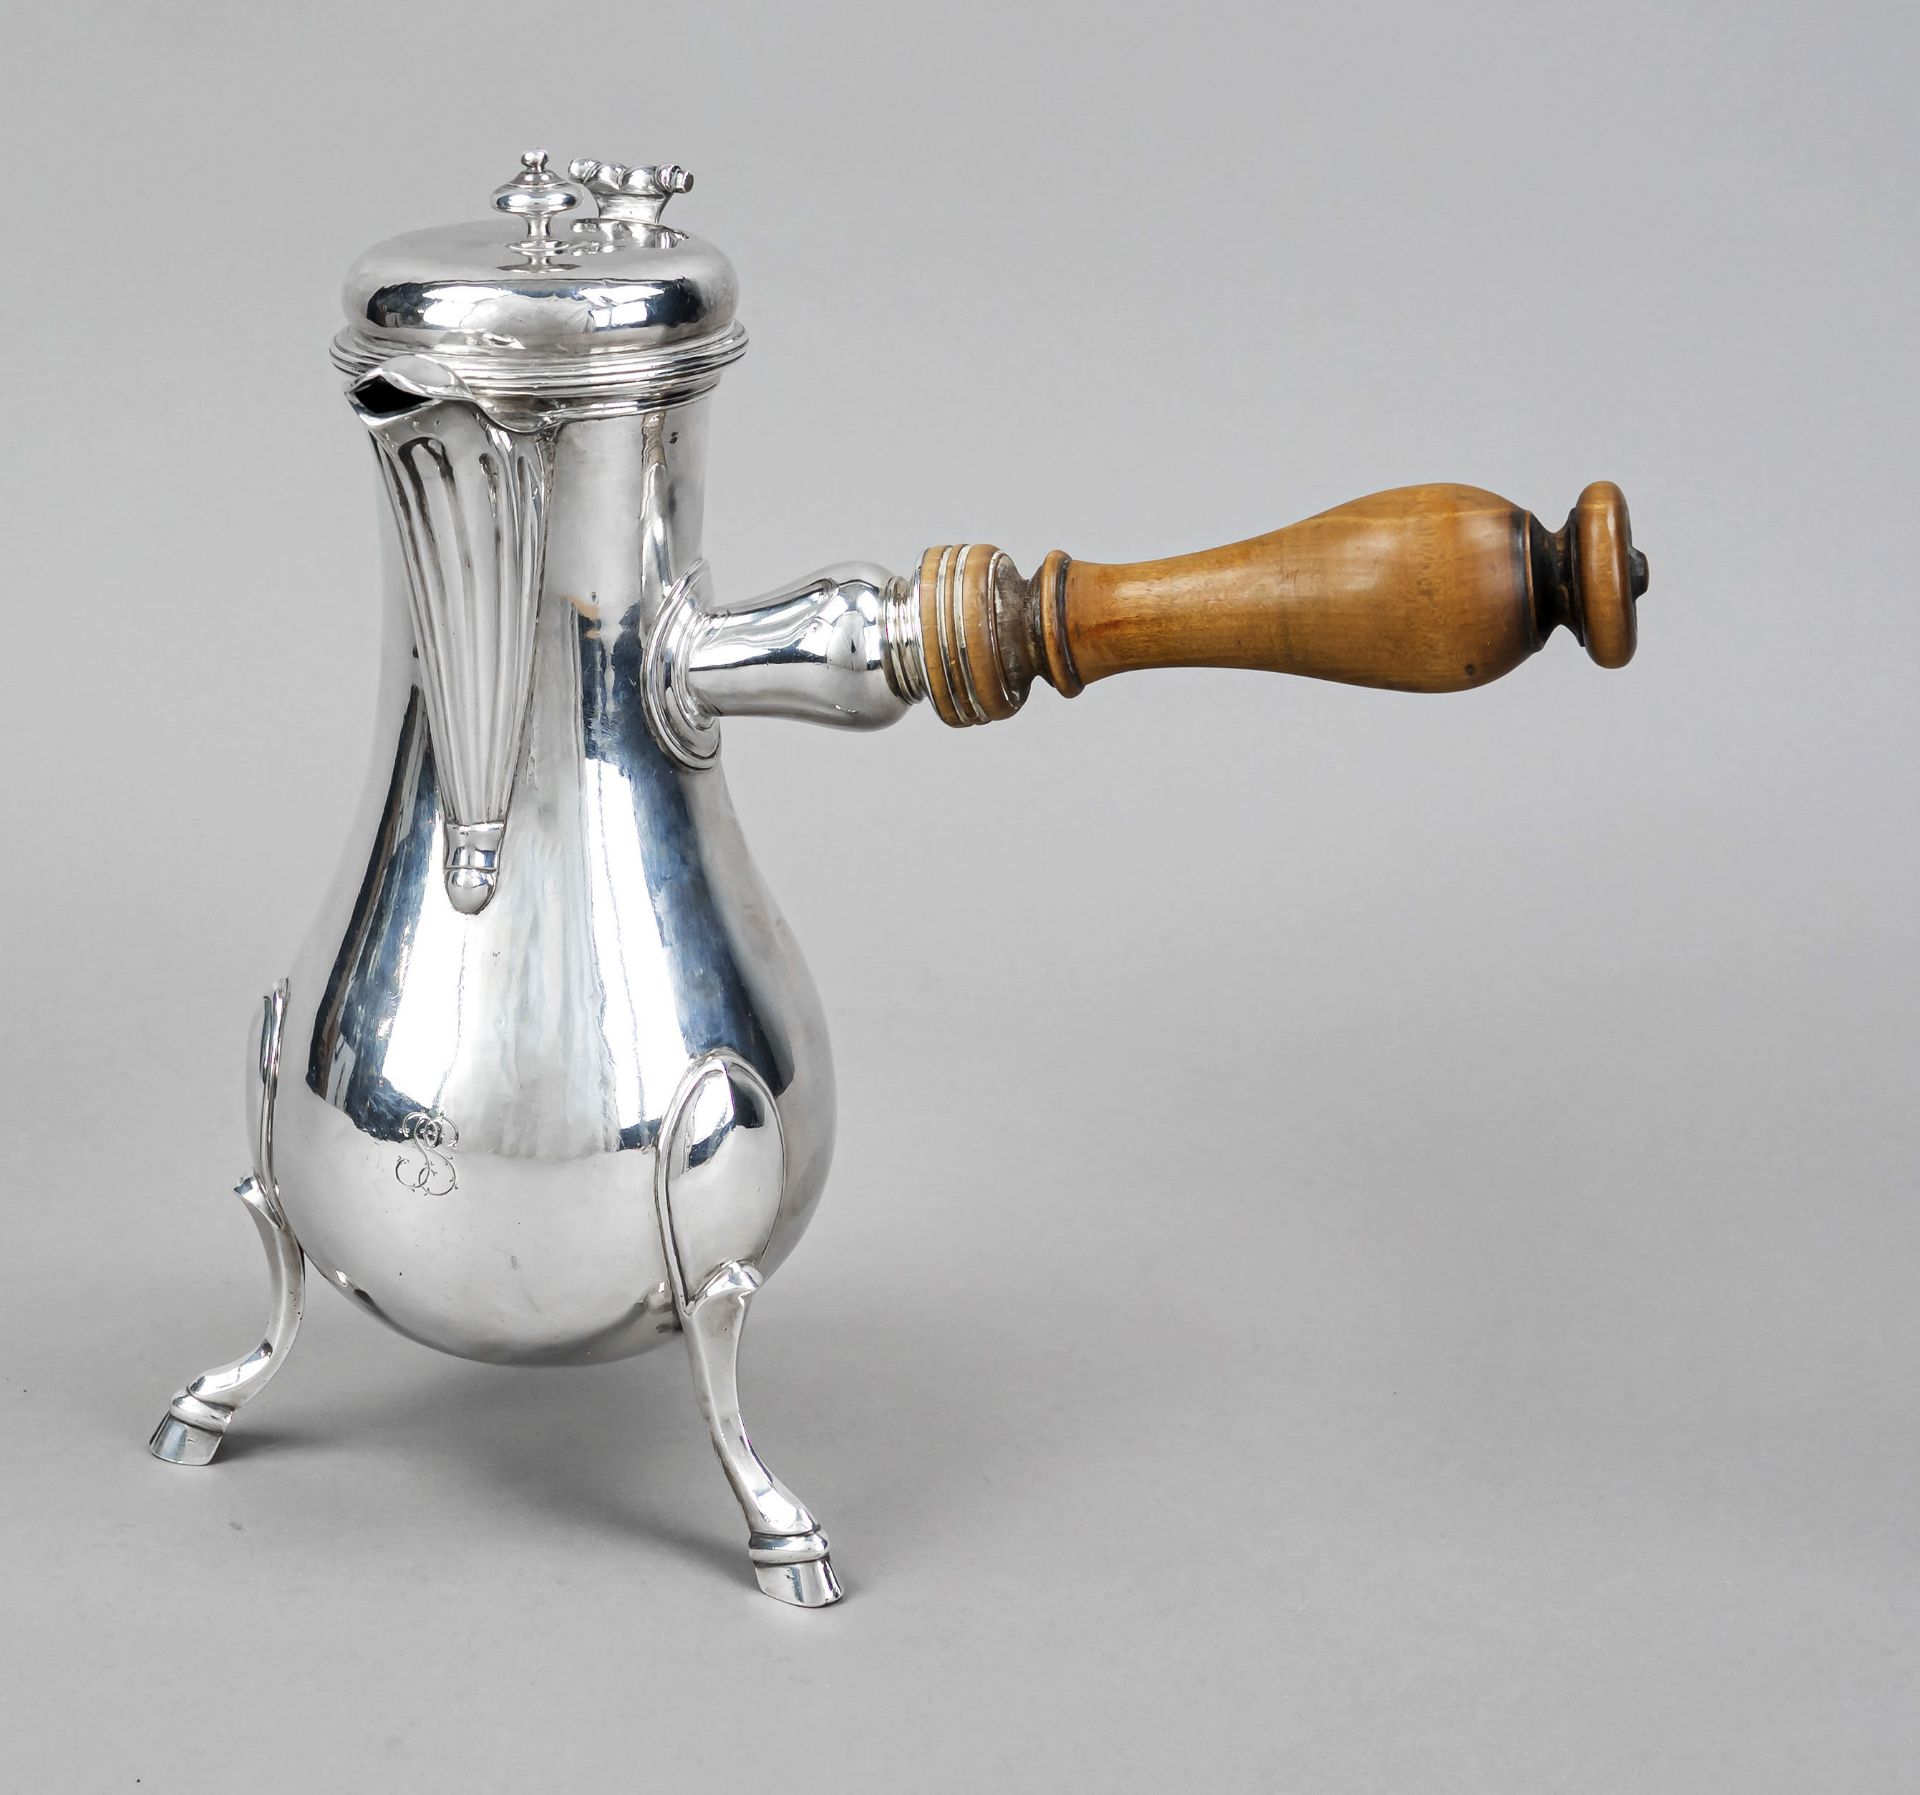 Baroque chocolate jug, France (?), late 18th century, hammered marks, hallmarked silver, on 3 curved